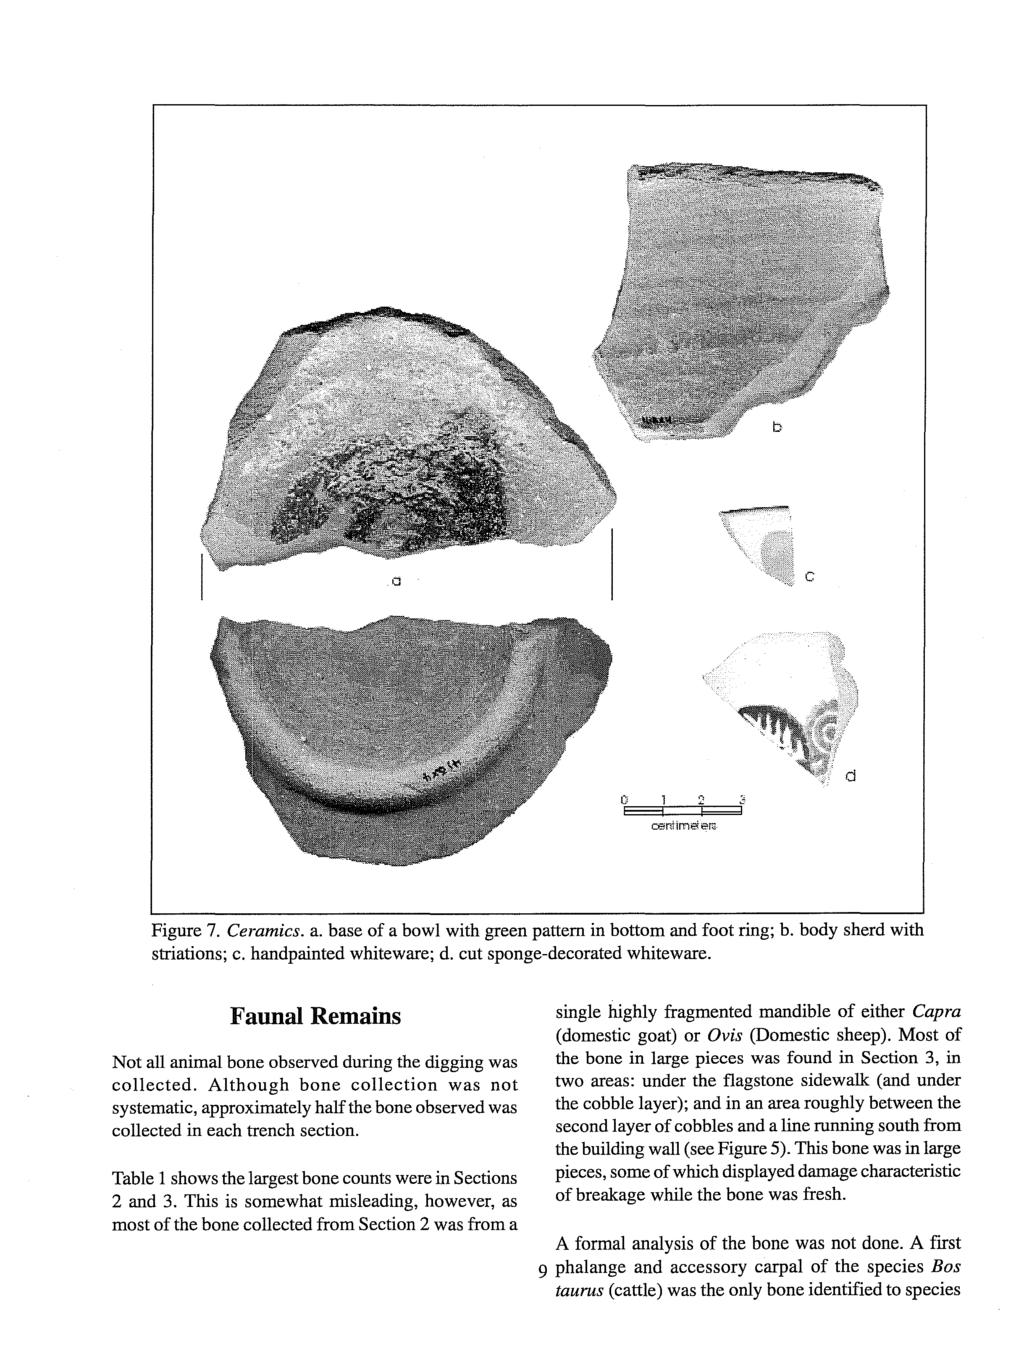 a Figure 7. Ceramics. a. base of a bowl with green pattern in bottom and foot ring; b. body sherd with striations; c. handpainted whiteware; d. cut sponge-decorated whiteware.